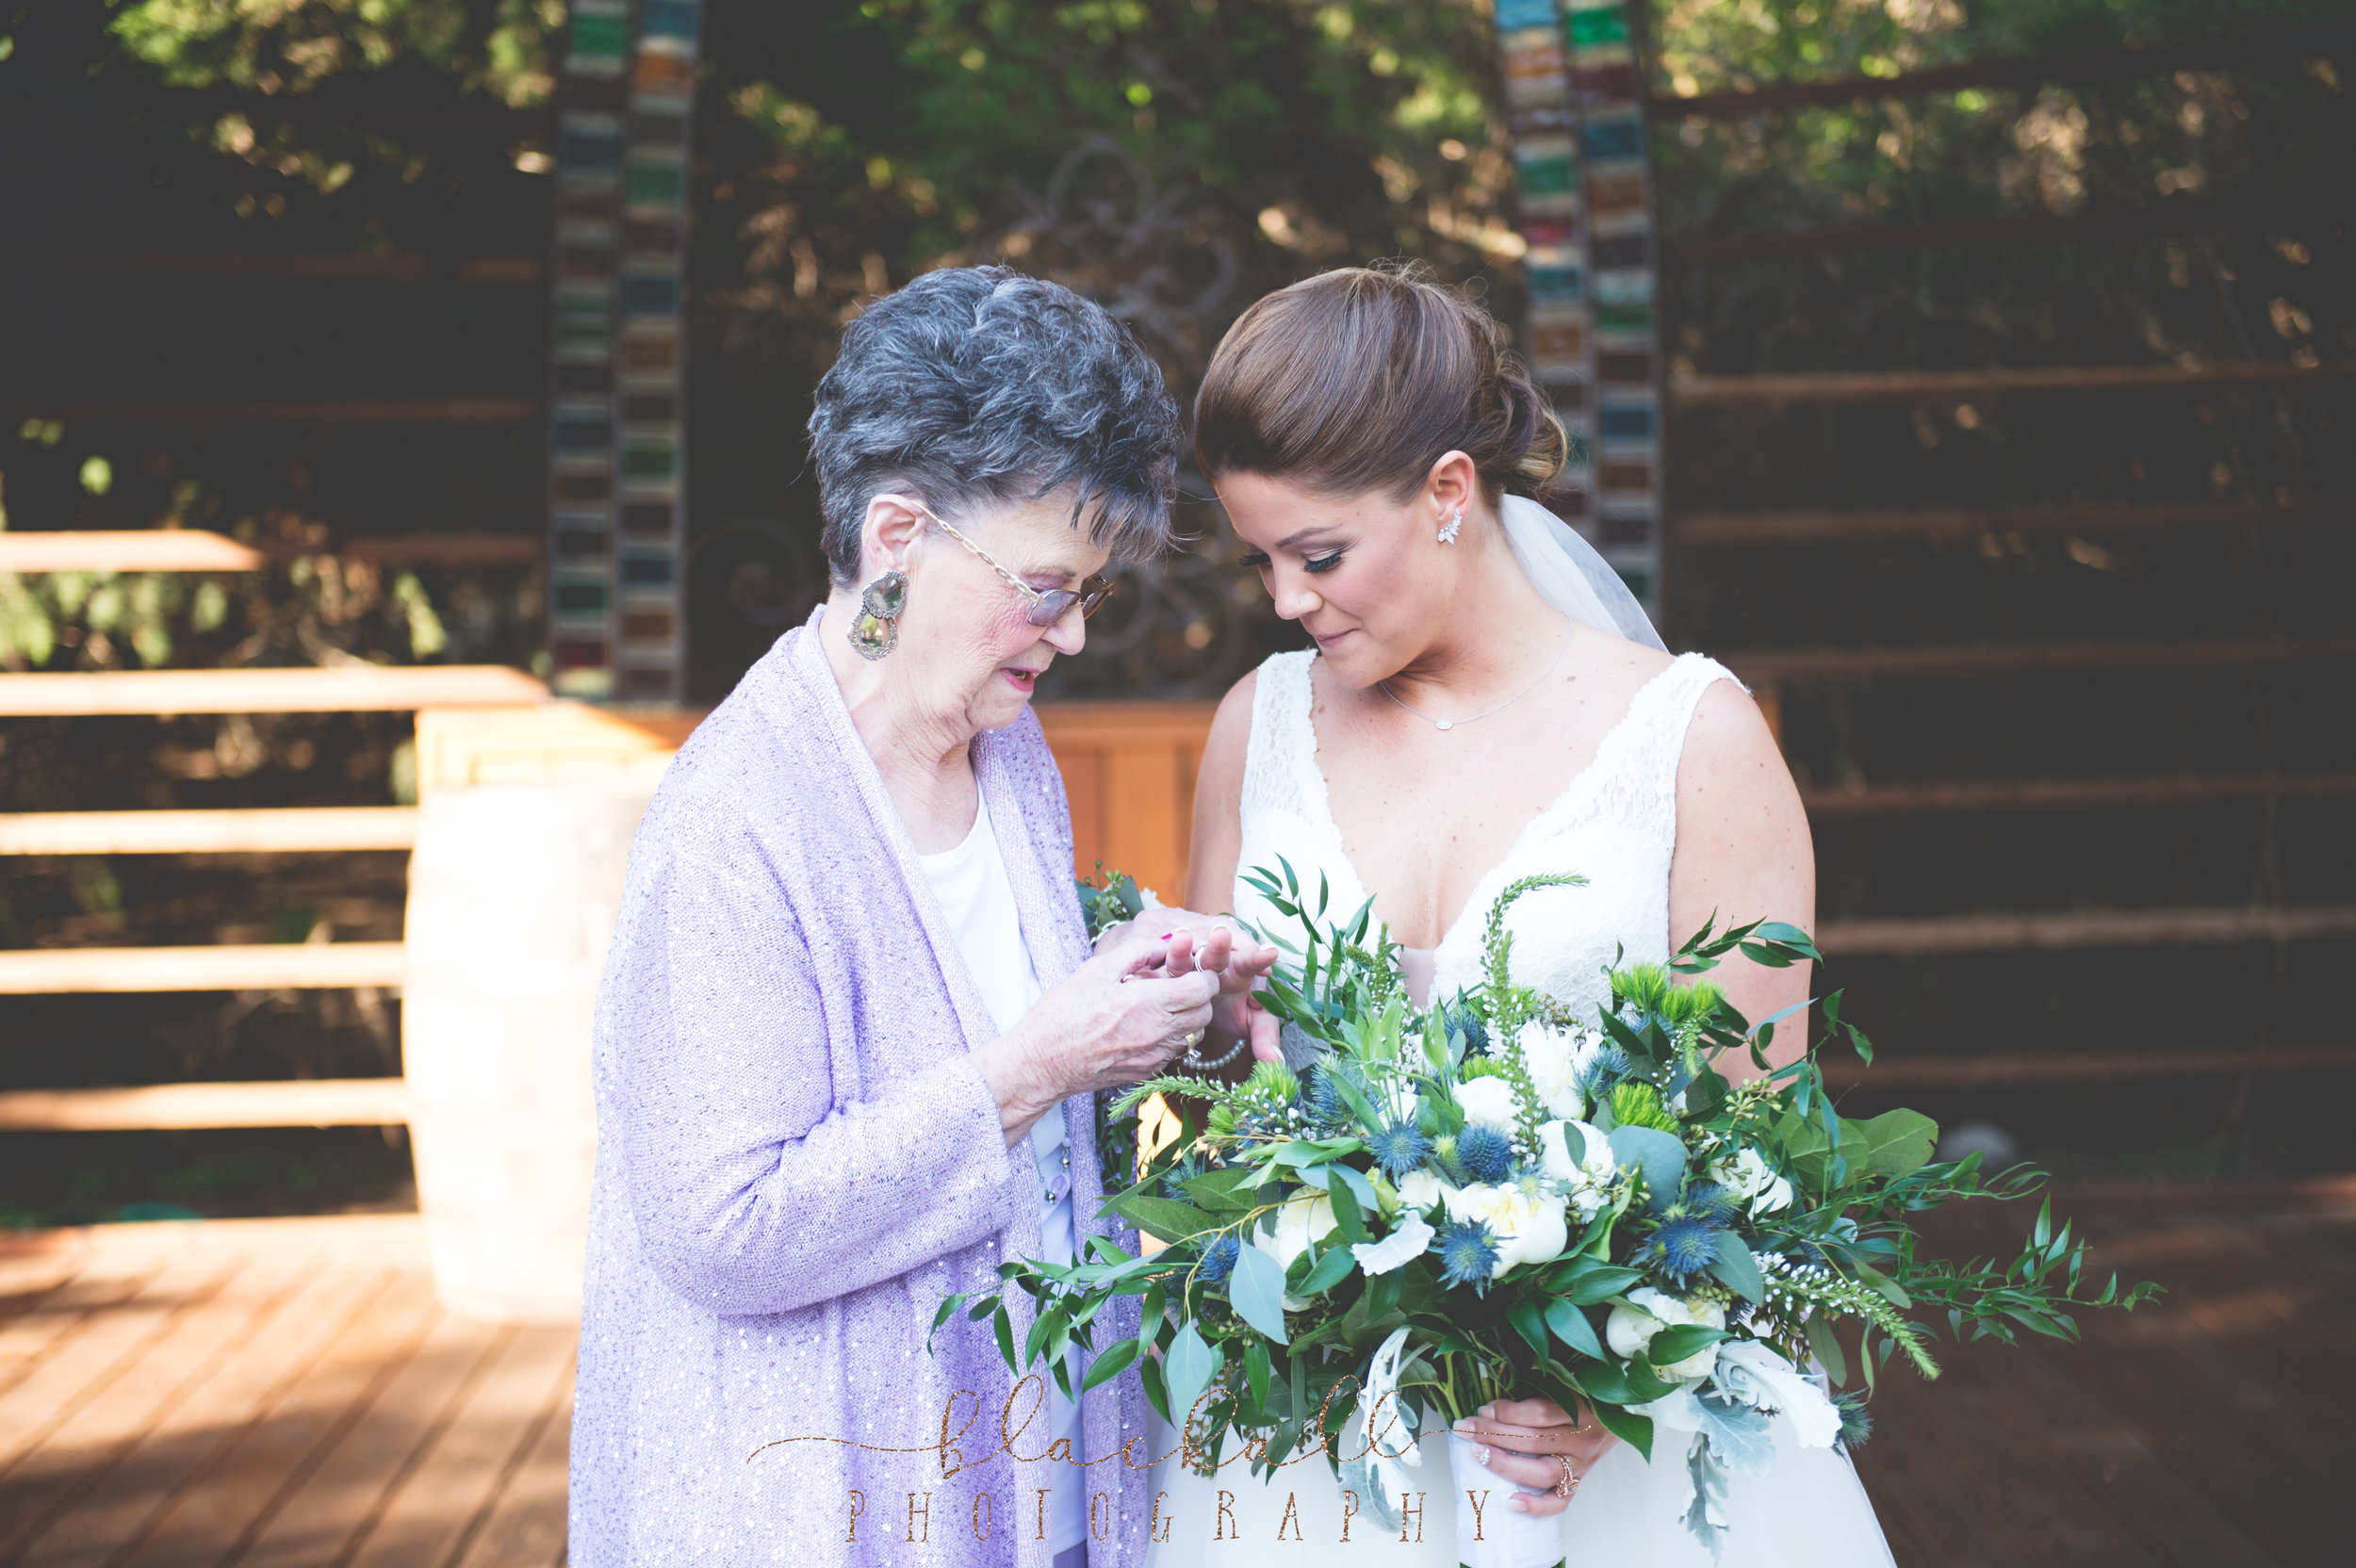  The bride was wearing her grandmothers wedding ring... such a beautiful moment.&nbsp; 